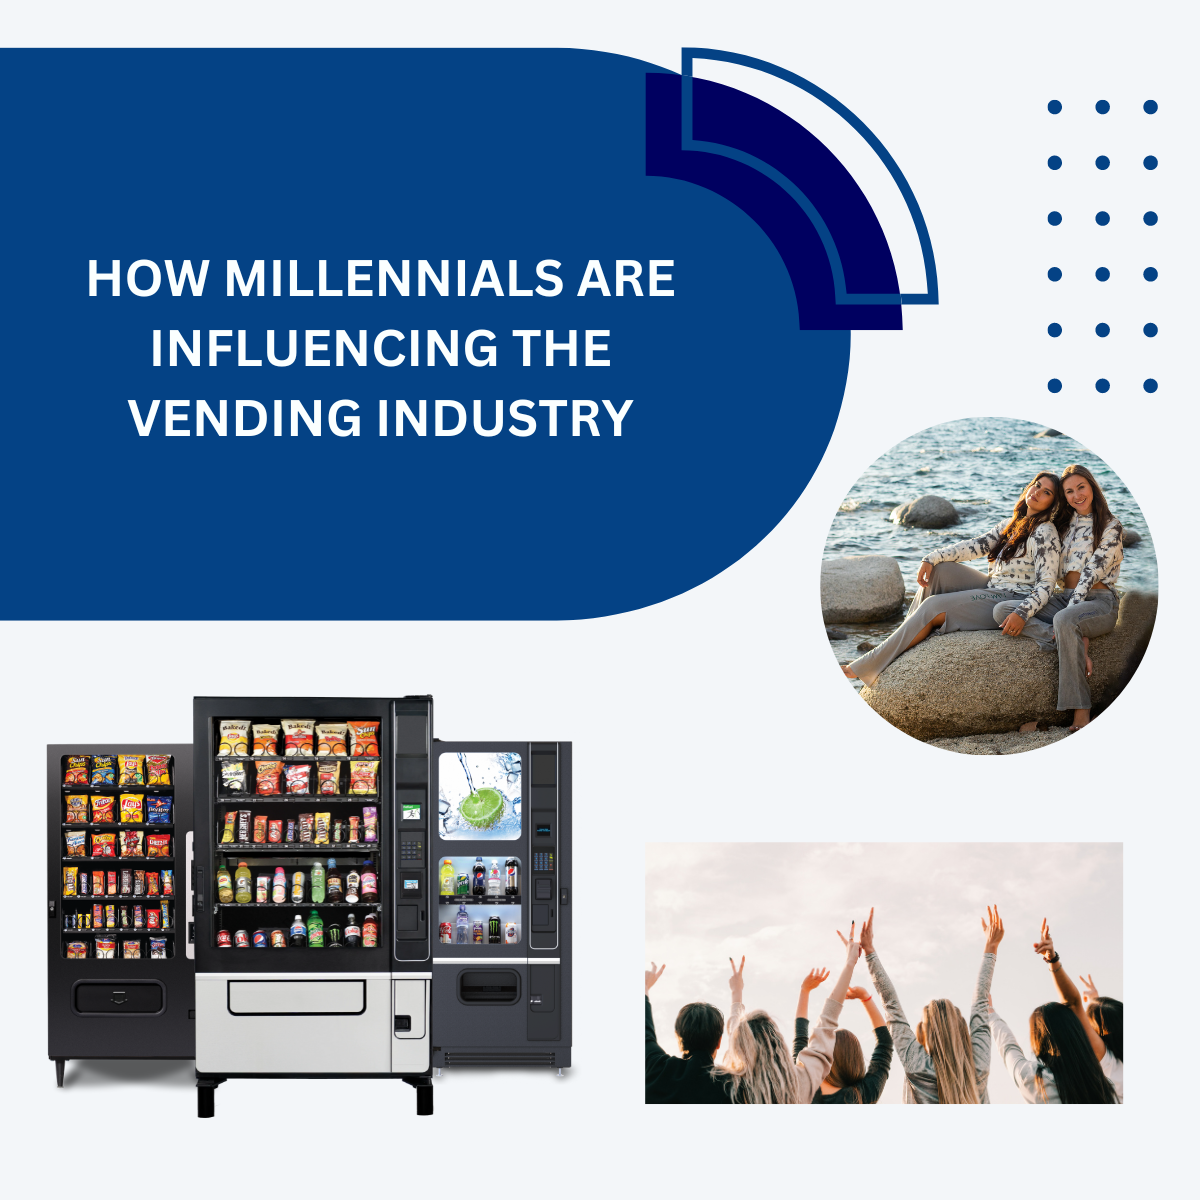 HOW MILLENNIALS ARE INFLUENCING THE VENDING INDUSTRY